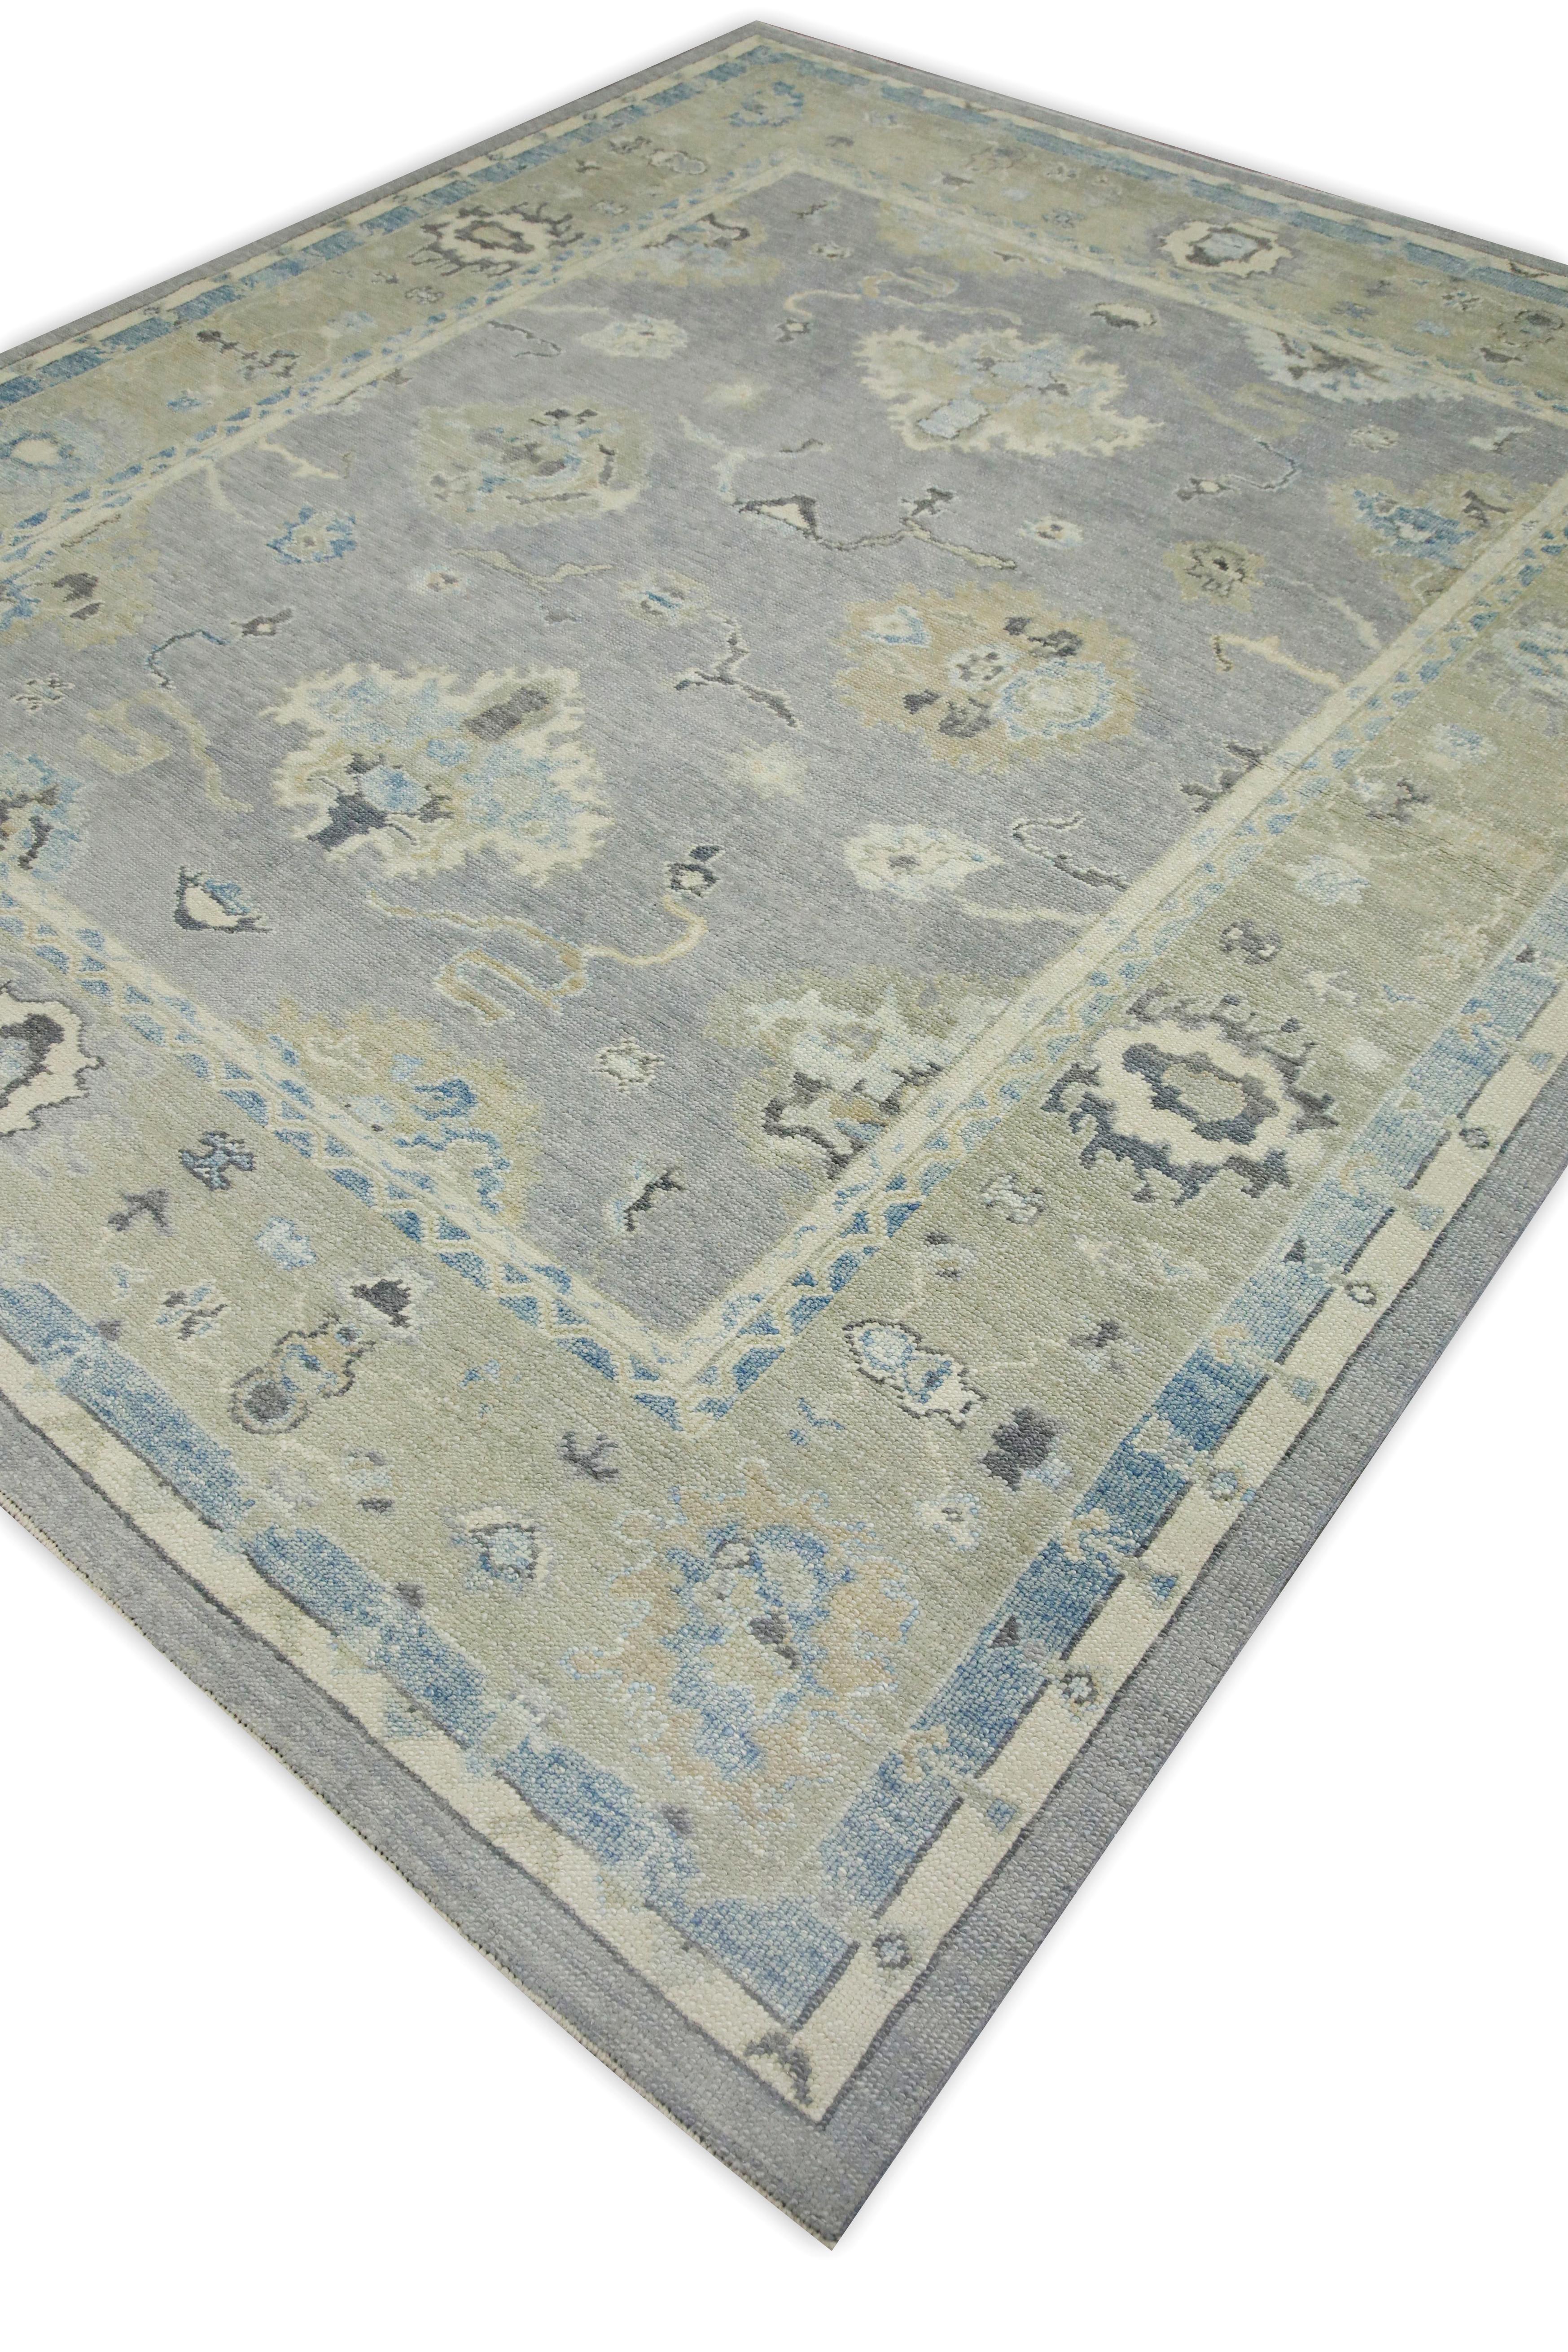 Contemporary Gray & Blue Floral Design Handwoven Wool Turkish Oushak Rug 8' x 9'6